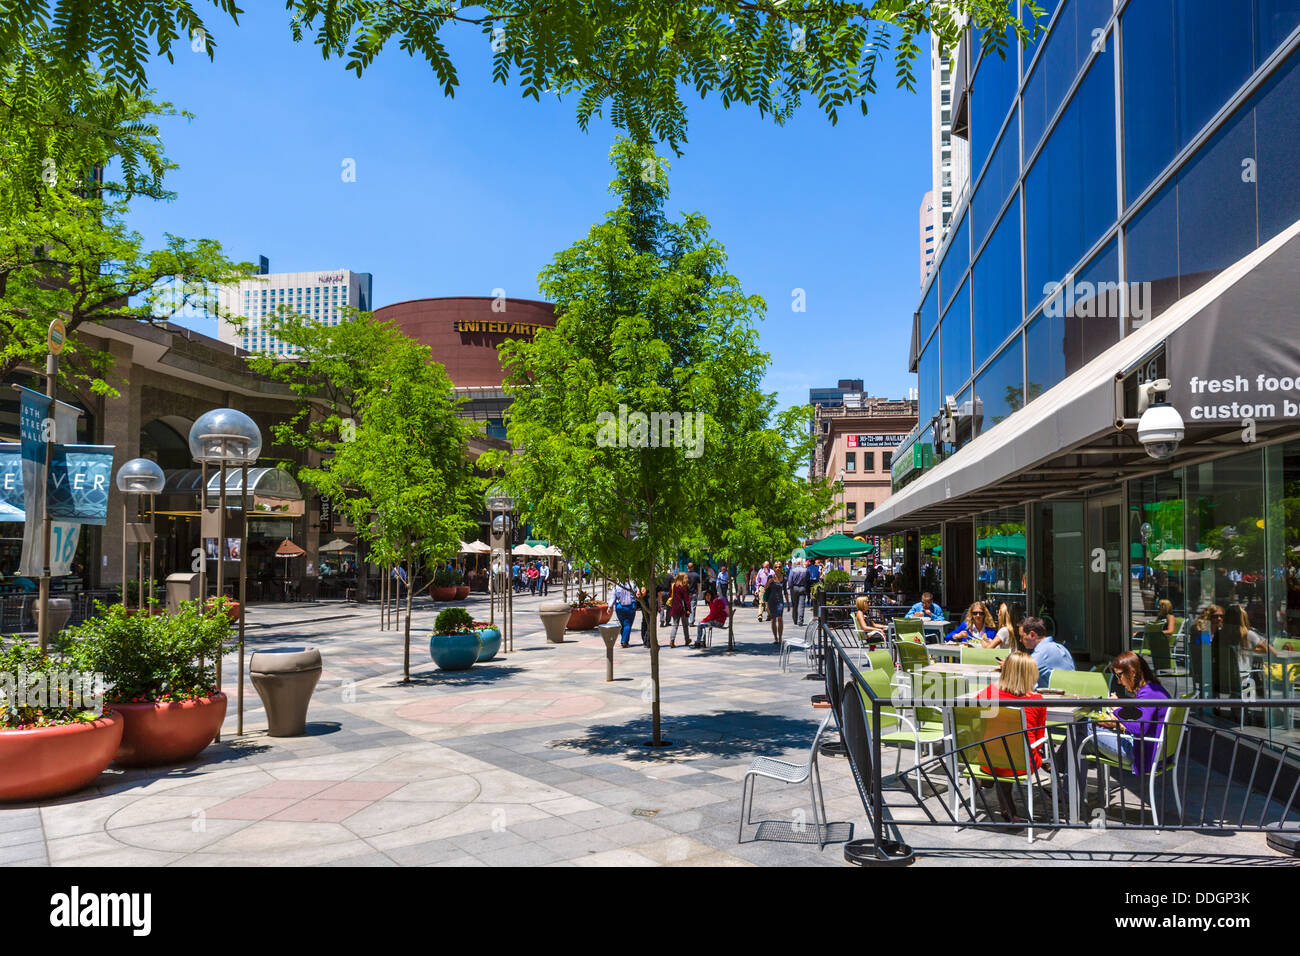 Sidewalk cafe on the pedestrianised 16th Street Mall in downtown Denver, Colorado, USA Stock Photo